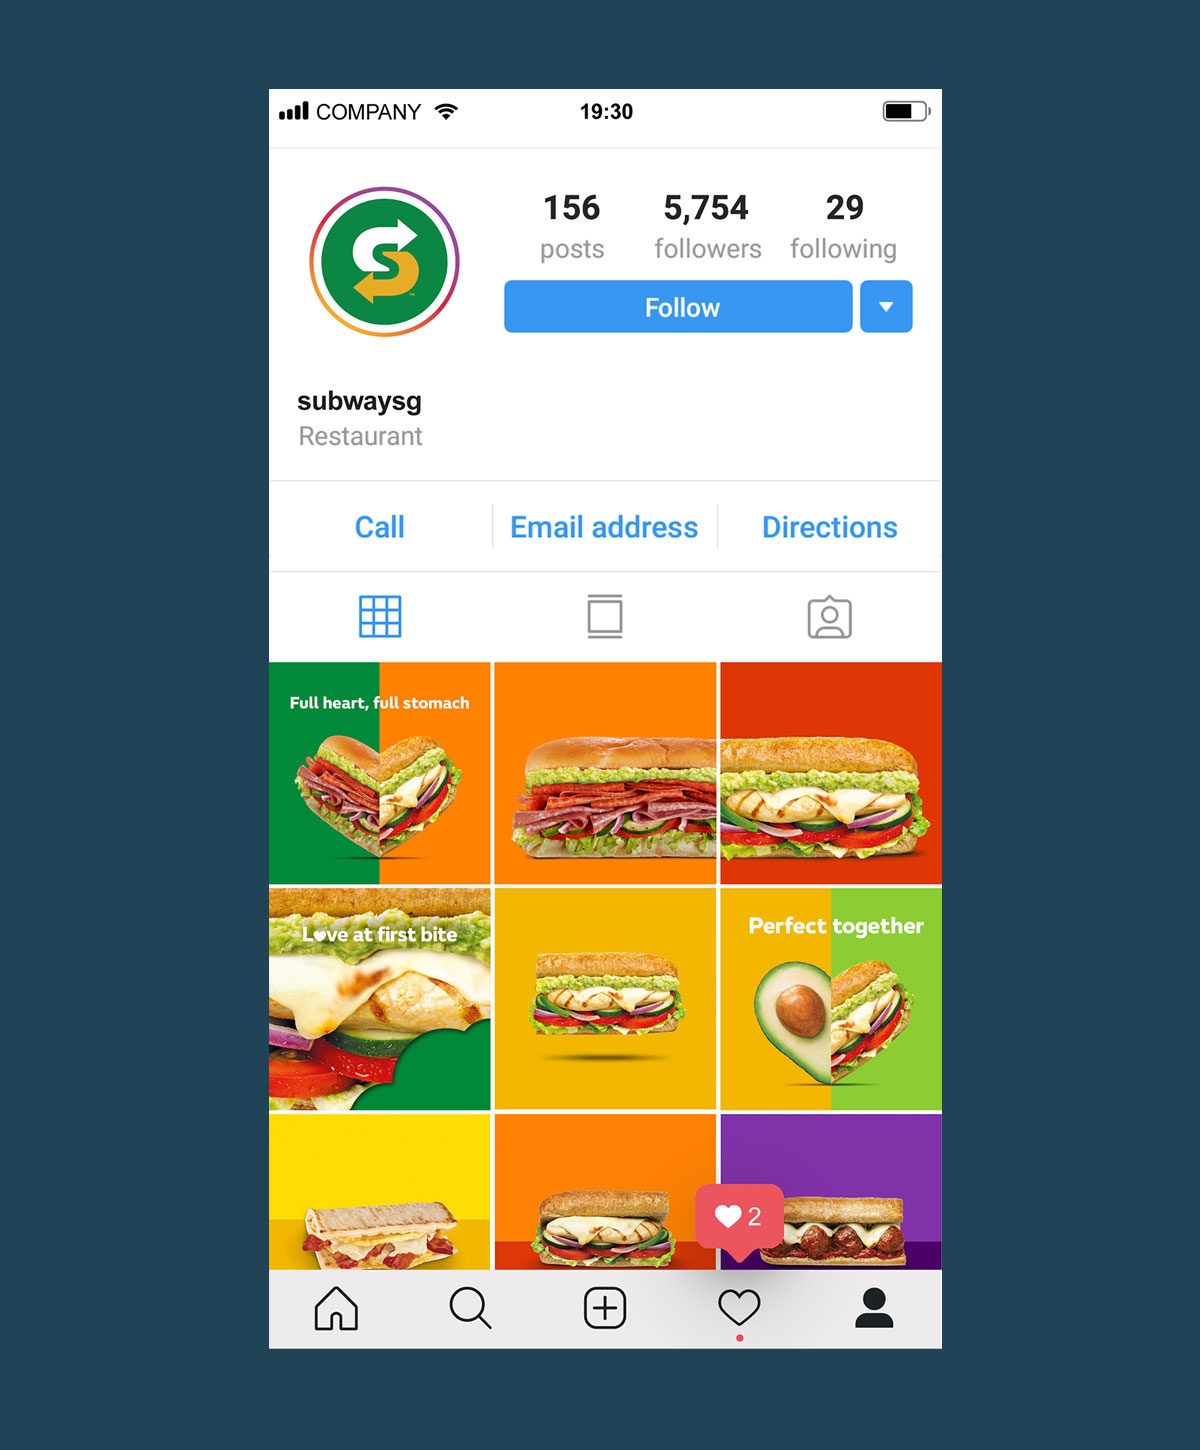 A seamless grid on Subway’s Instagram page, formed by  visually striking visuals of sandwiches and fresh ingredients